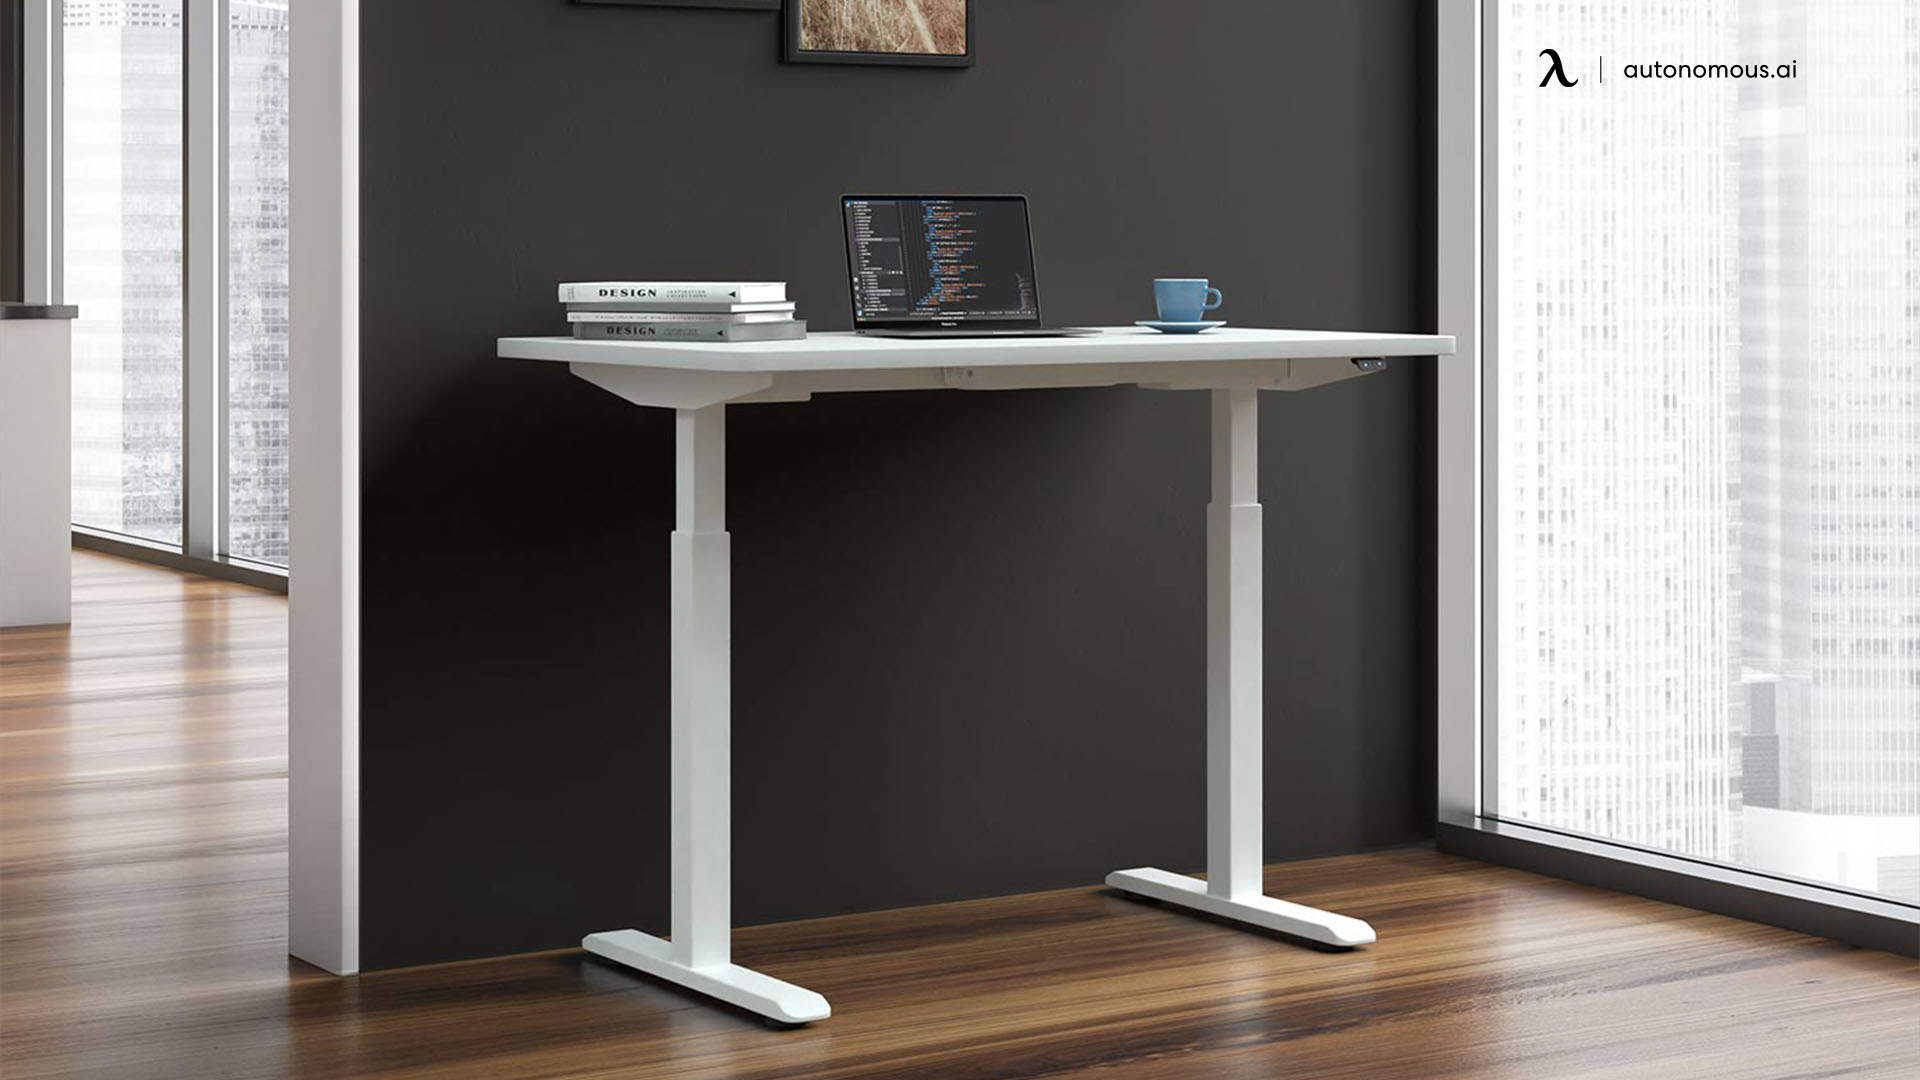 Timotion's compact computer desk